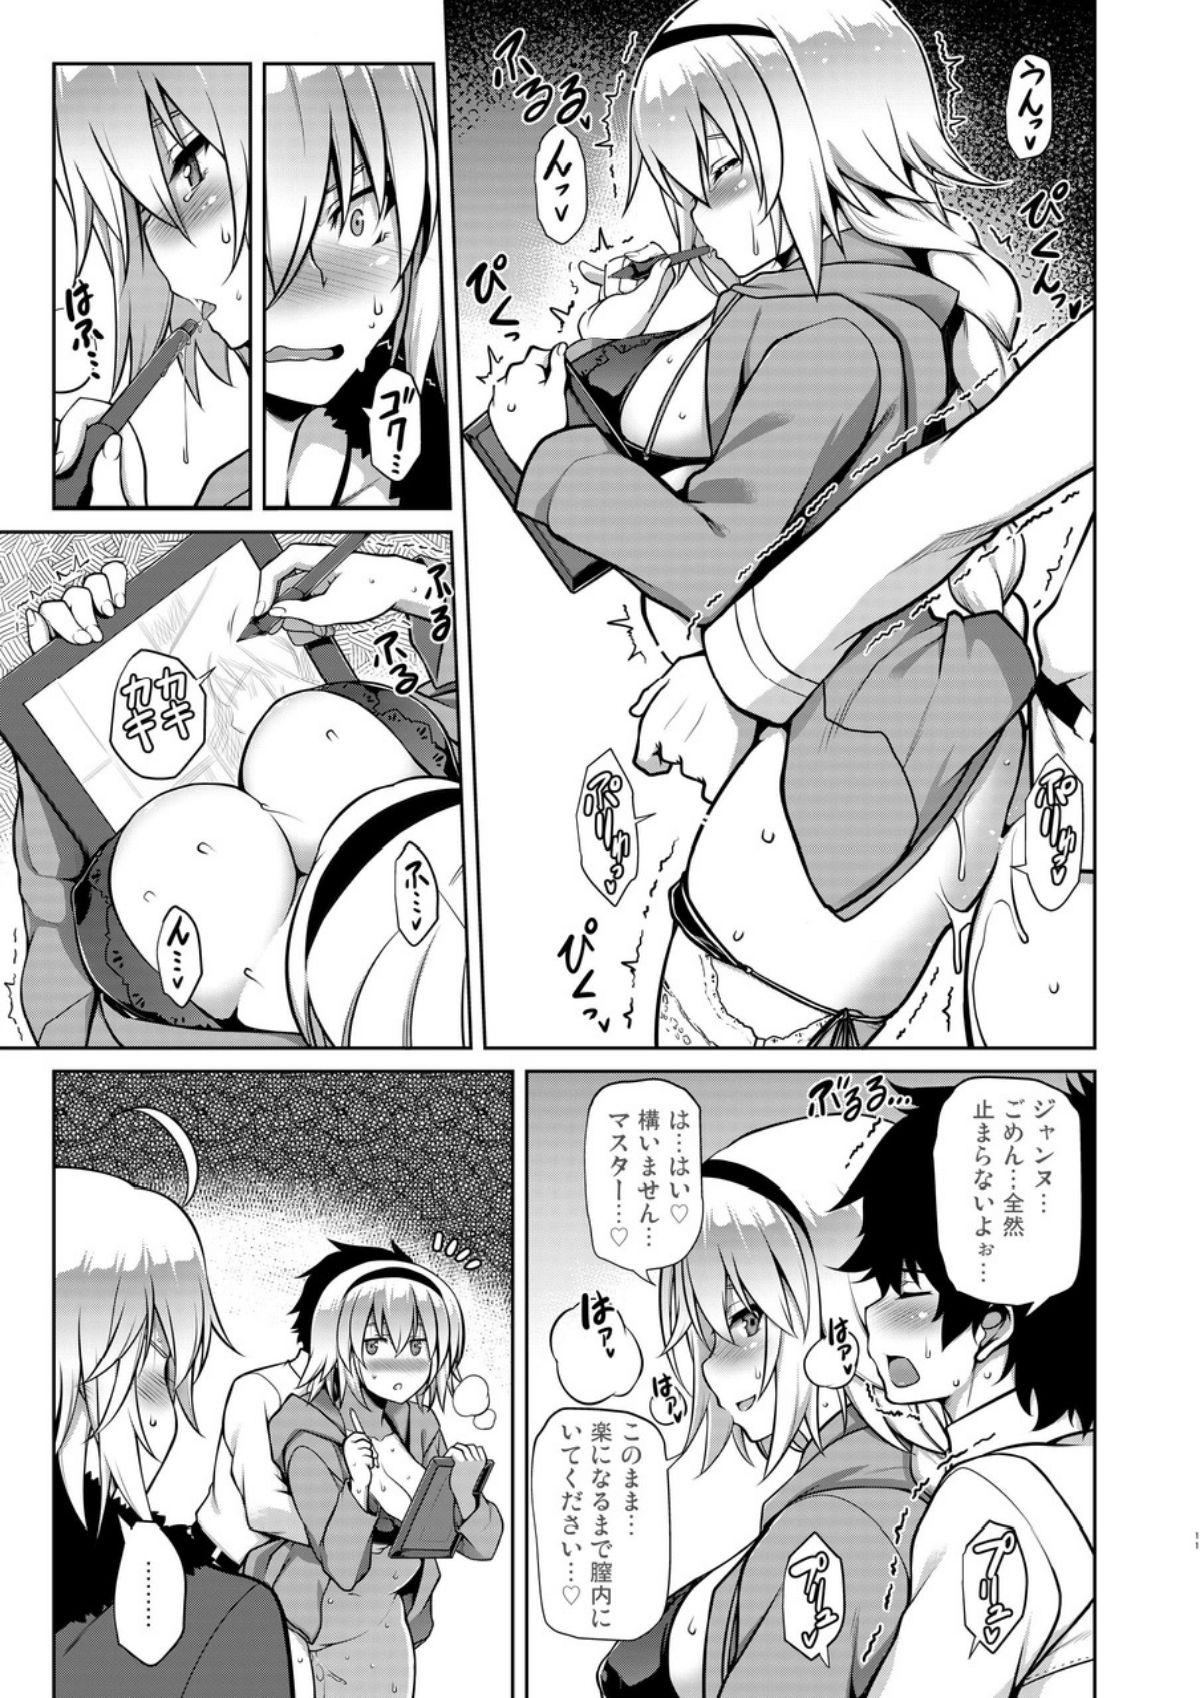 For Itezora no Summer Lady - Fate grand order Moaning - Page 10